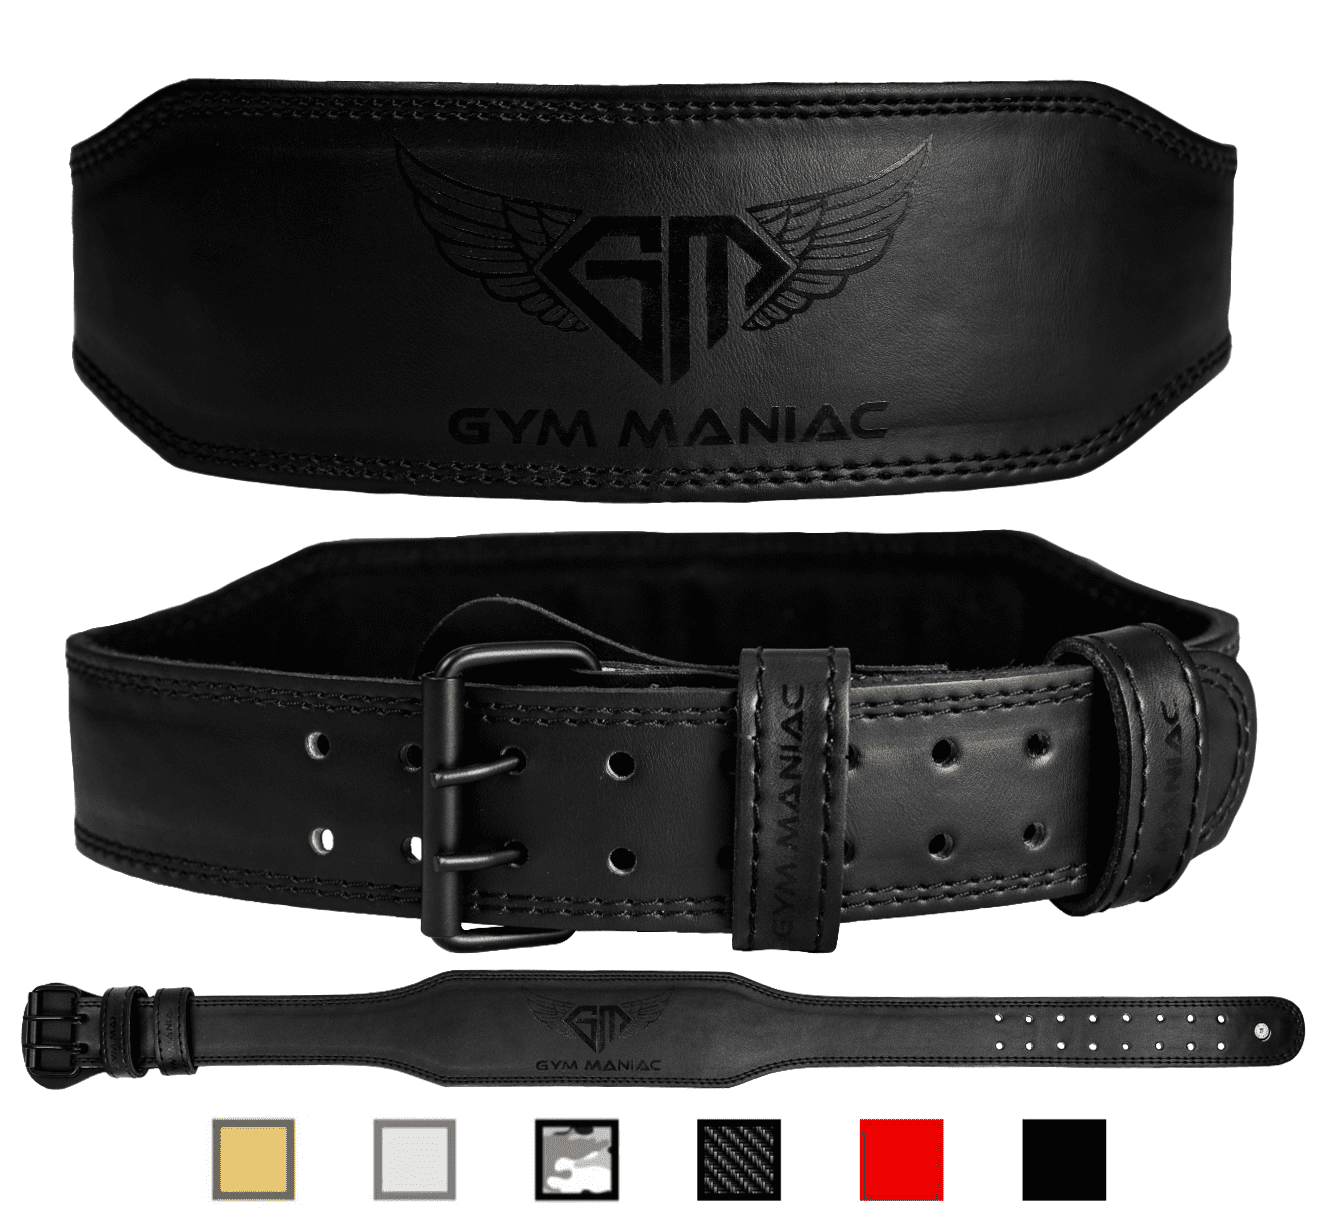 Gym Maniac GM Weight Lifting Waist Gym Belt Adjustable Size Support Your Back & Alleviate Pains Comfy Suede 2 Prong Buckle Reinforced Stitching